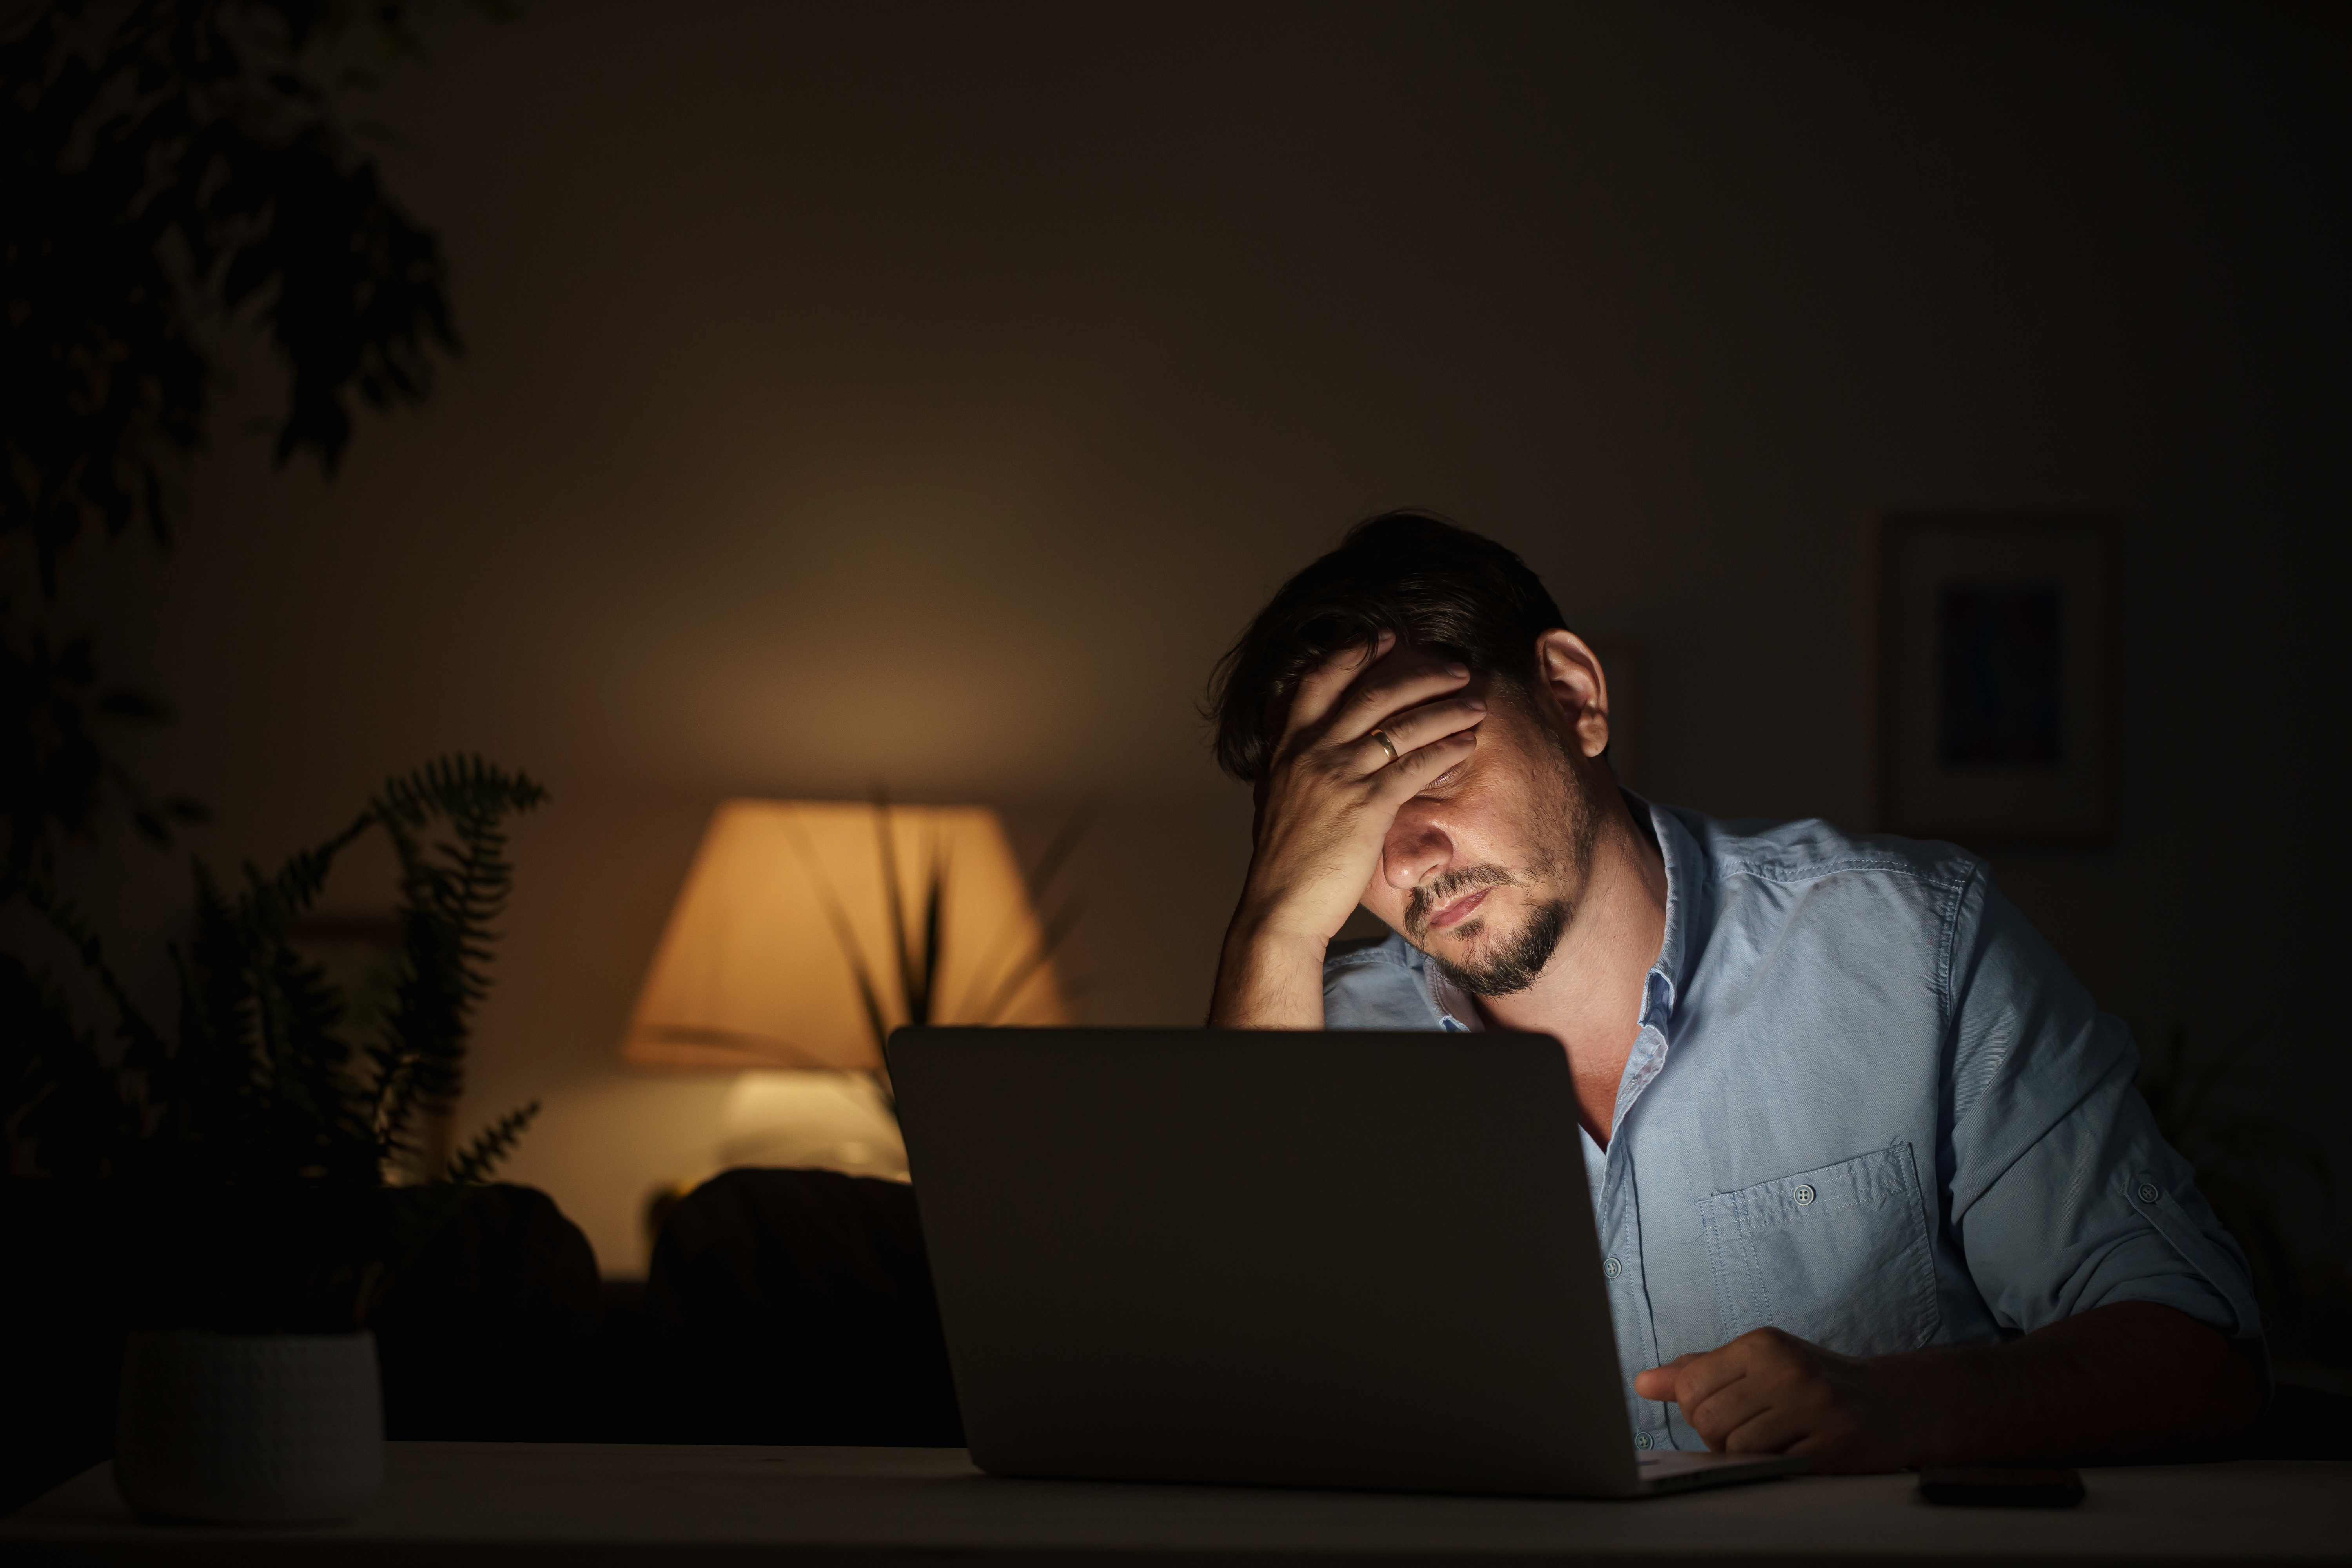 A man sitting in front of a laptop screen with his hand covering his eyes | Source: Shutterstock